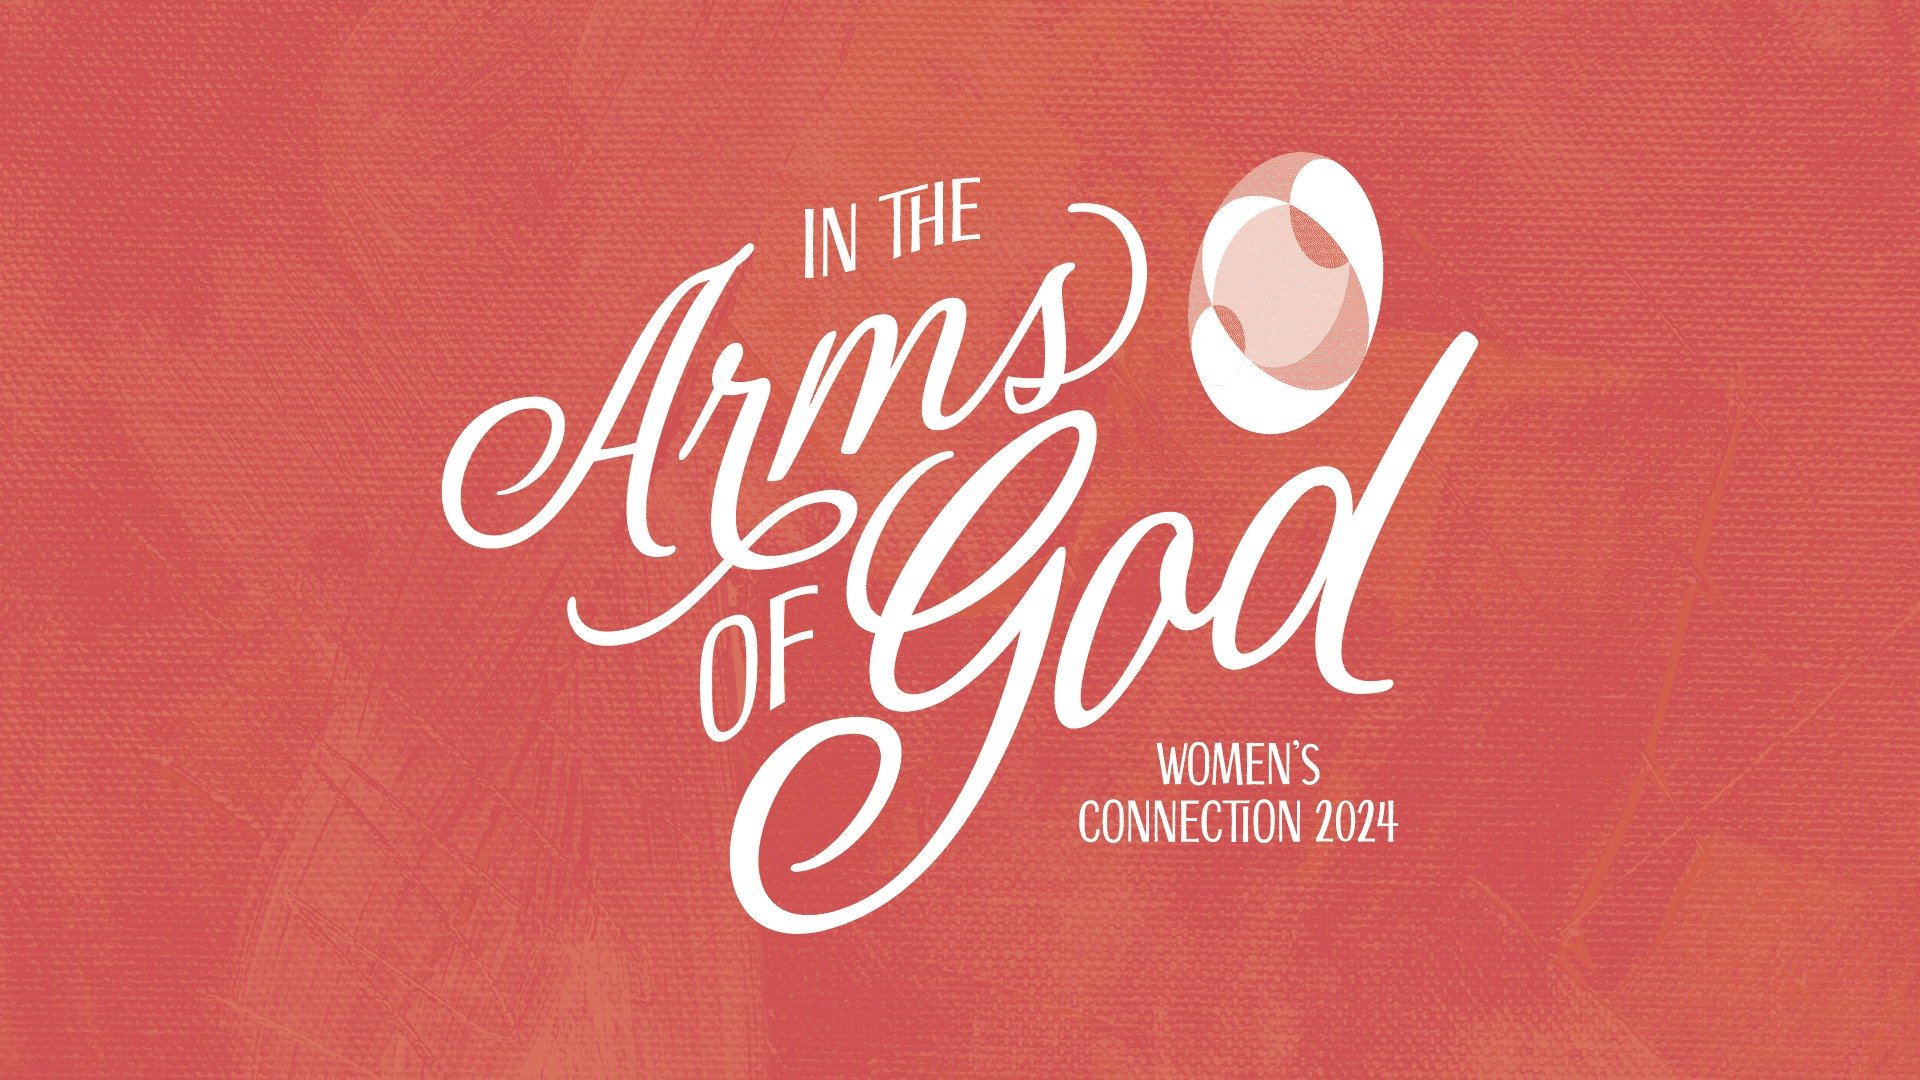 Women&rsquo;s Connection Conference at Montreat

Save the date and plan to join us for the Women&rsquo;s Connection the weekend of August 9-11, 2024 in the beautiful mountains of Montreat, North Carolina. This year&rsquo;s keynote speaker is Becca St